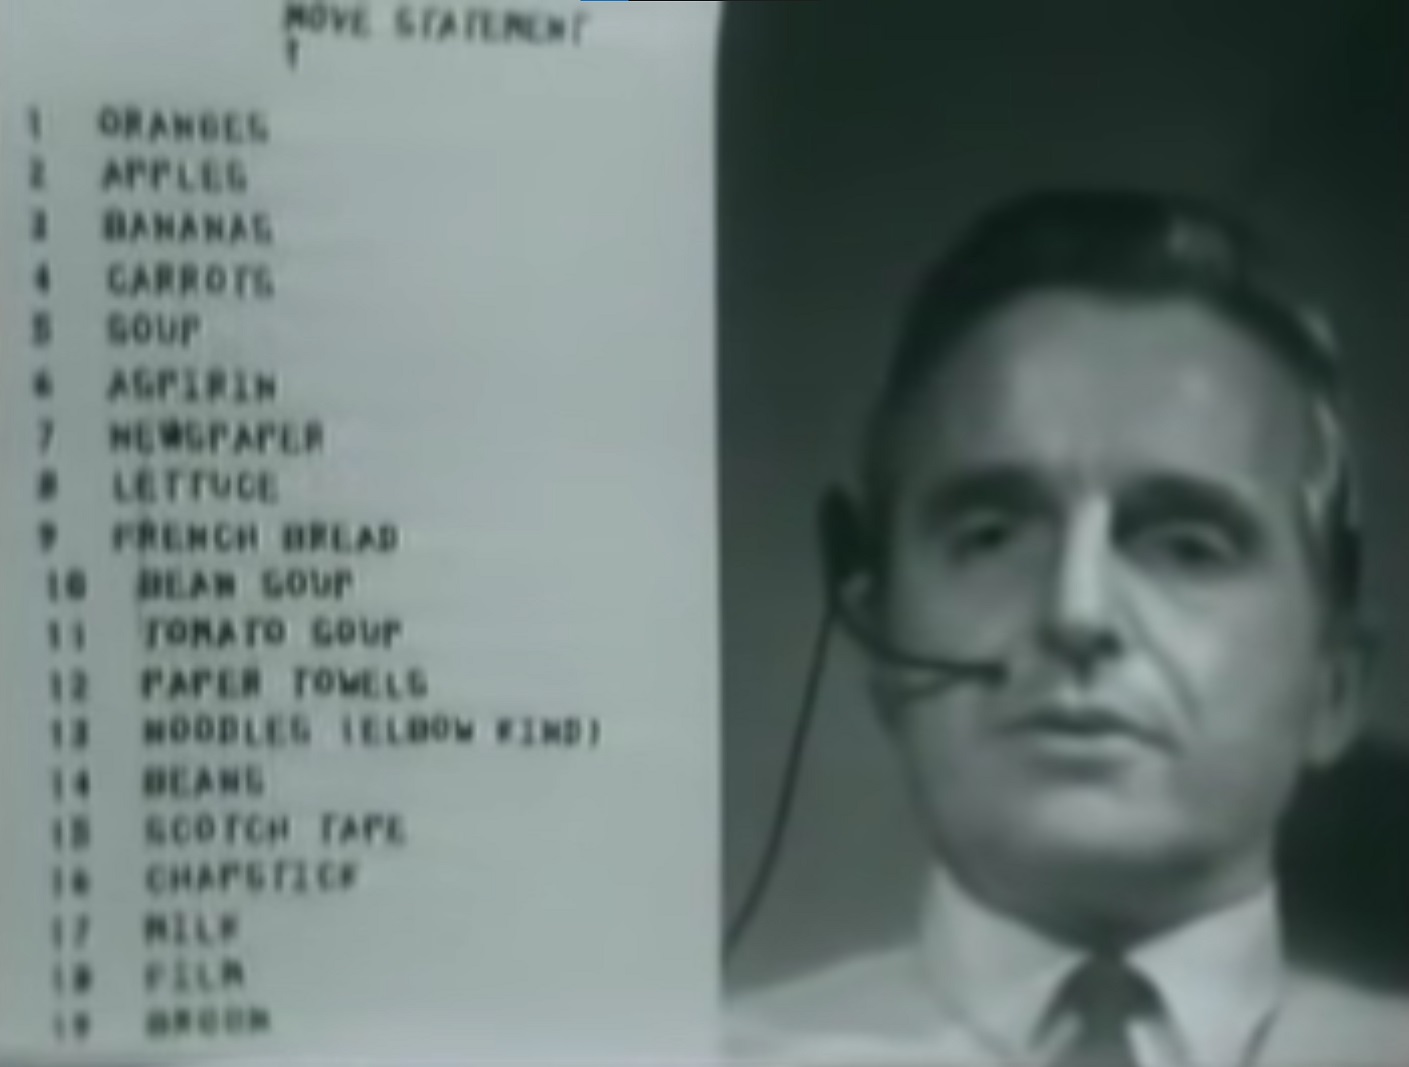 Douglas Engelbart&rsquo;s performance in &ldquo;The mother of all demos&rdquo;